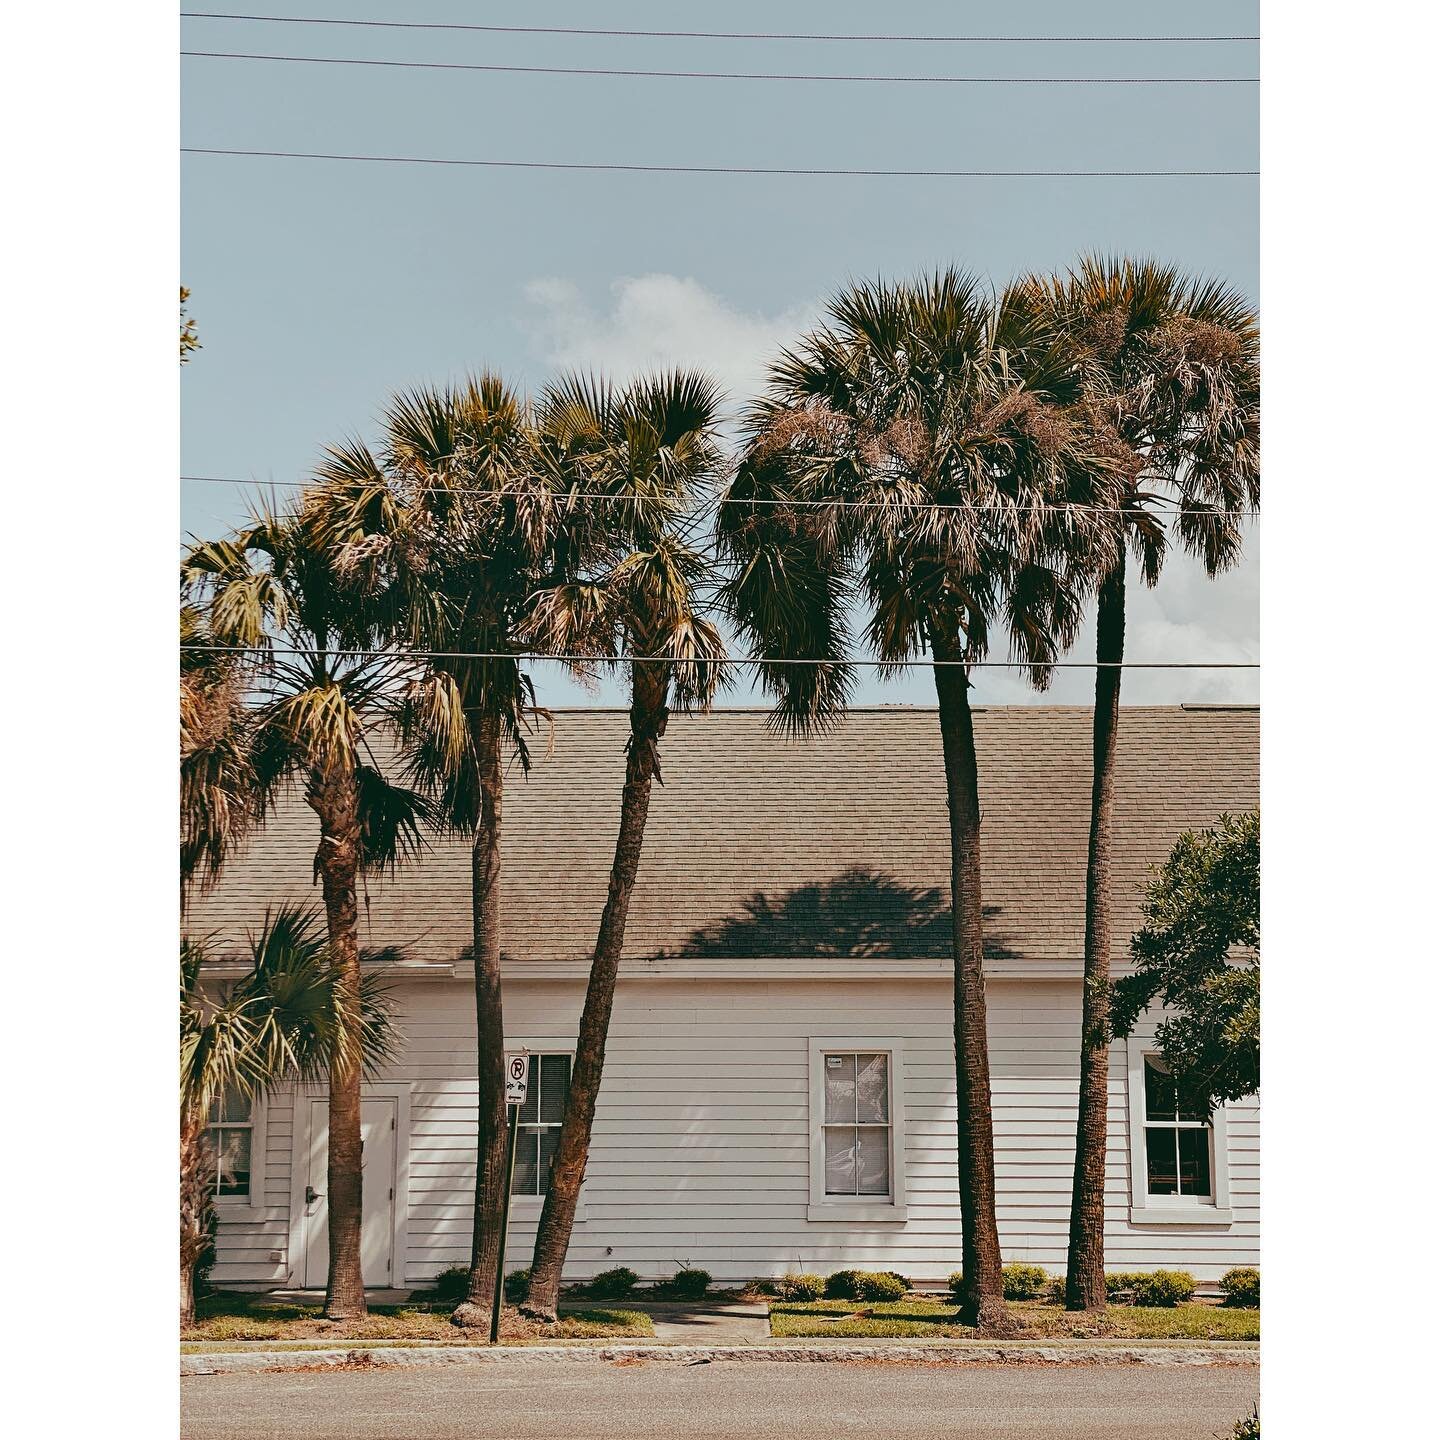 I really wish I could have palm trees surrounding me everyday. This is why I go to Charleston every year. 

#charlestonsc #palmtrees #travel